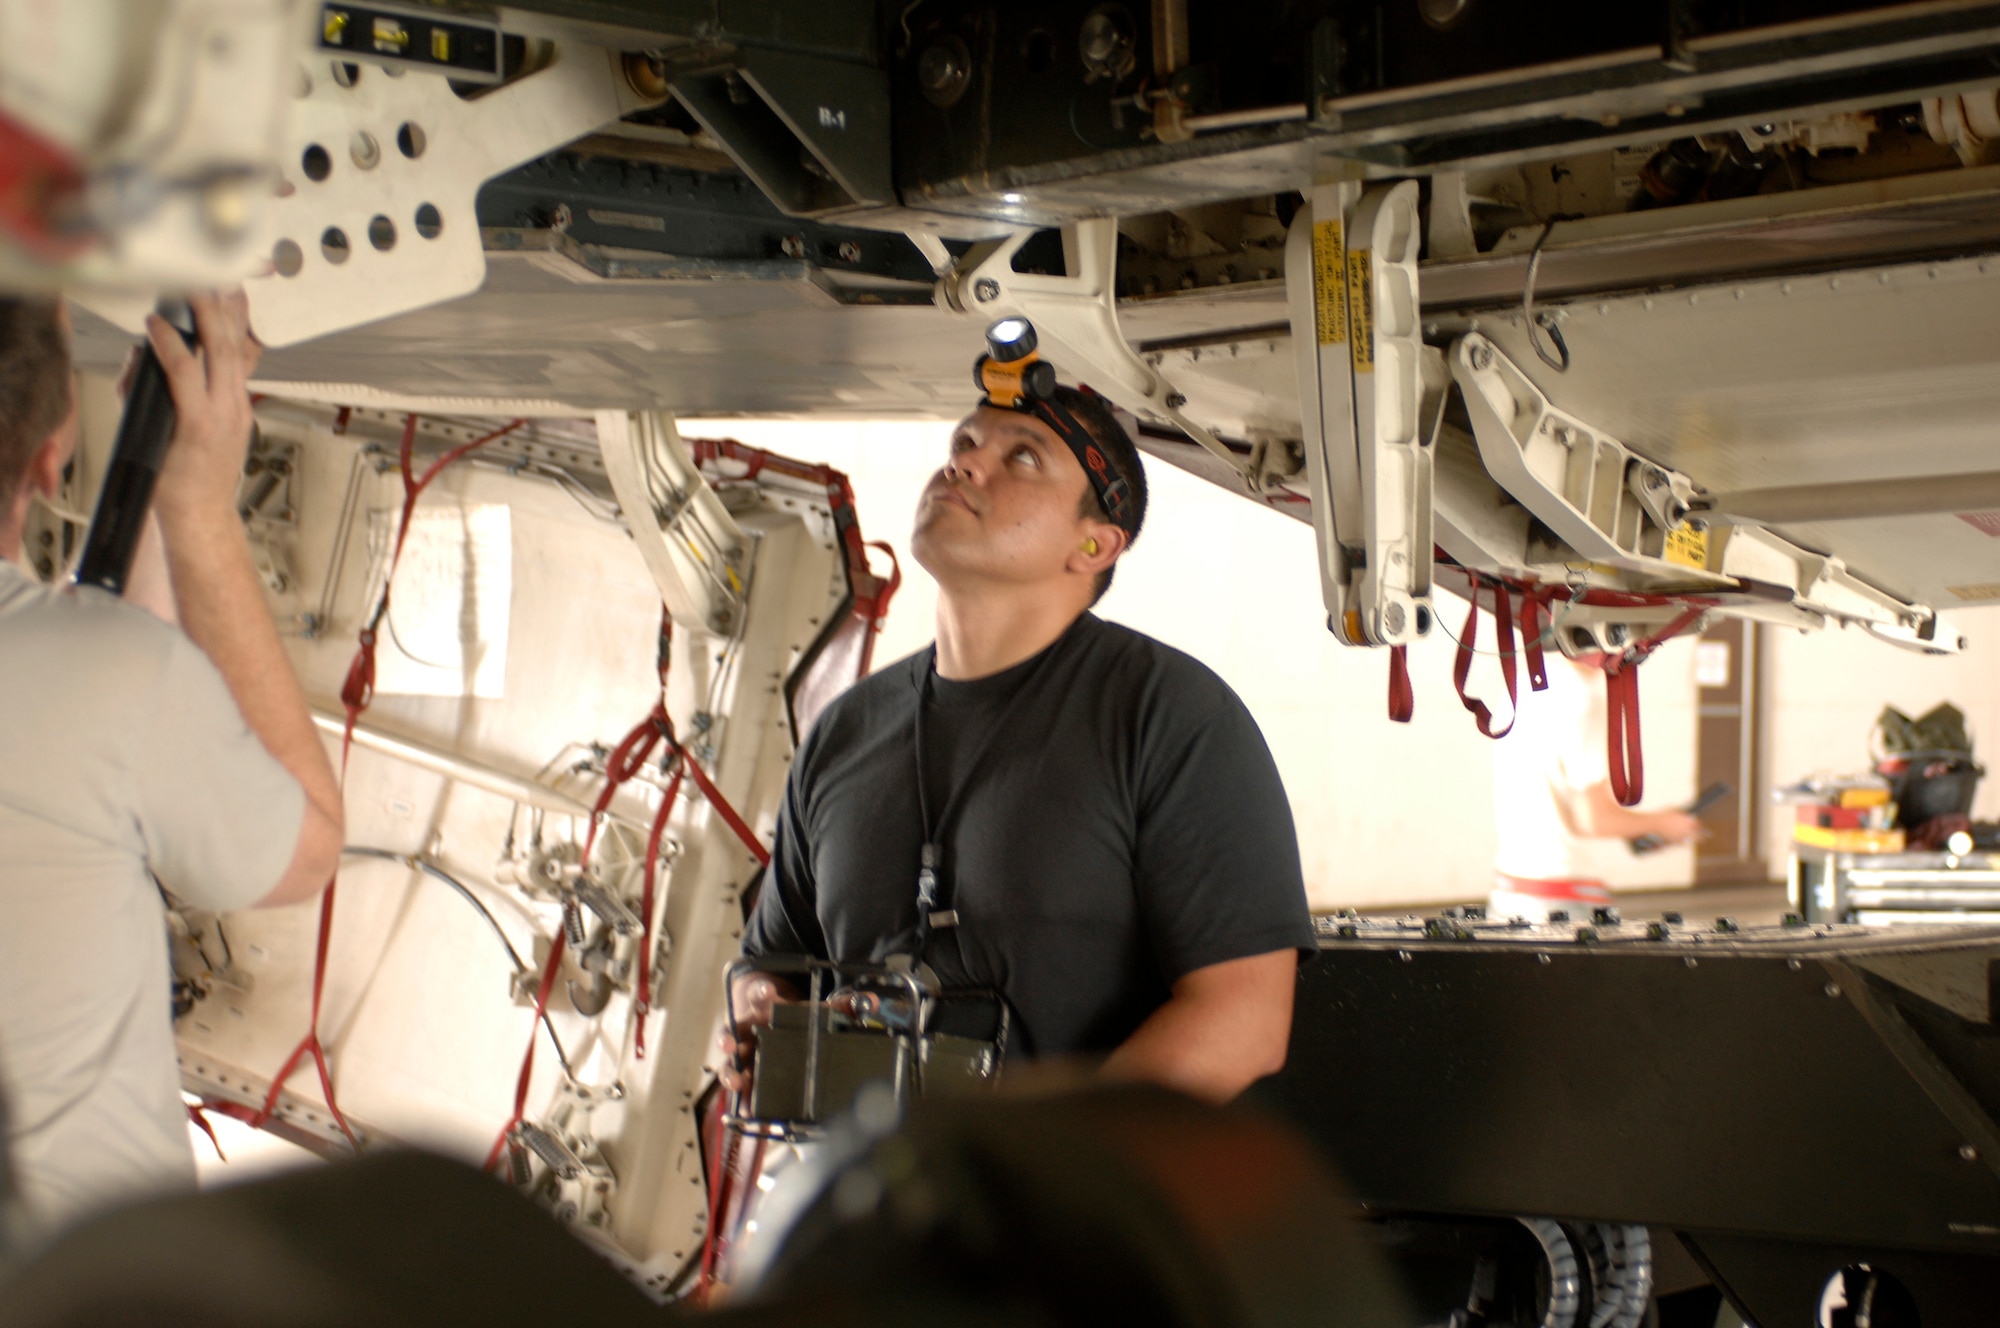 WHITEMAN AIR FORCE BASE, Mo. - Staff Sgt. Juan Molina, 509th Aircraft Maintenance Squadron, observes a weapons trailer position Aug. 17 as he raises it into the bomb bay of a B-2 Spirit. Mock bombs were loaded on the B-2 as part of the 72nd Test and Evaluation Squadron Combat Sledgehammer. (U.S. Air Force photo/Staff Sgt. Jason Barebo)